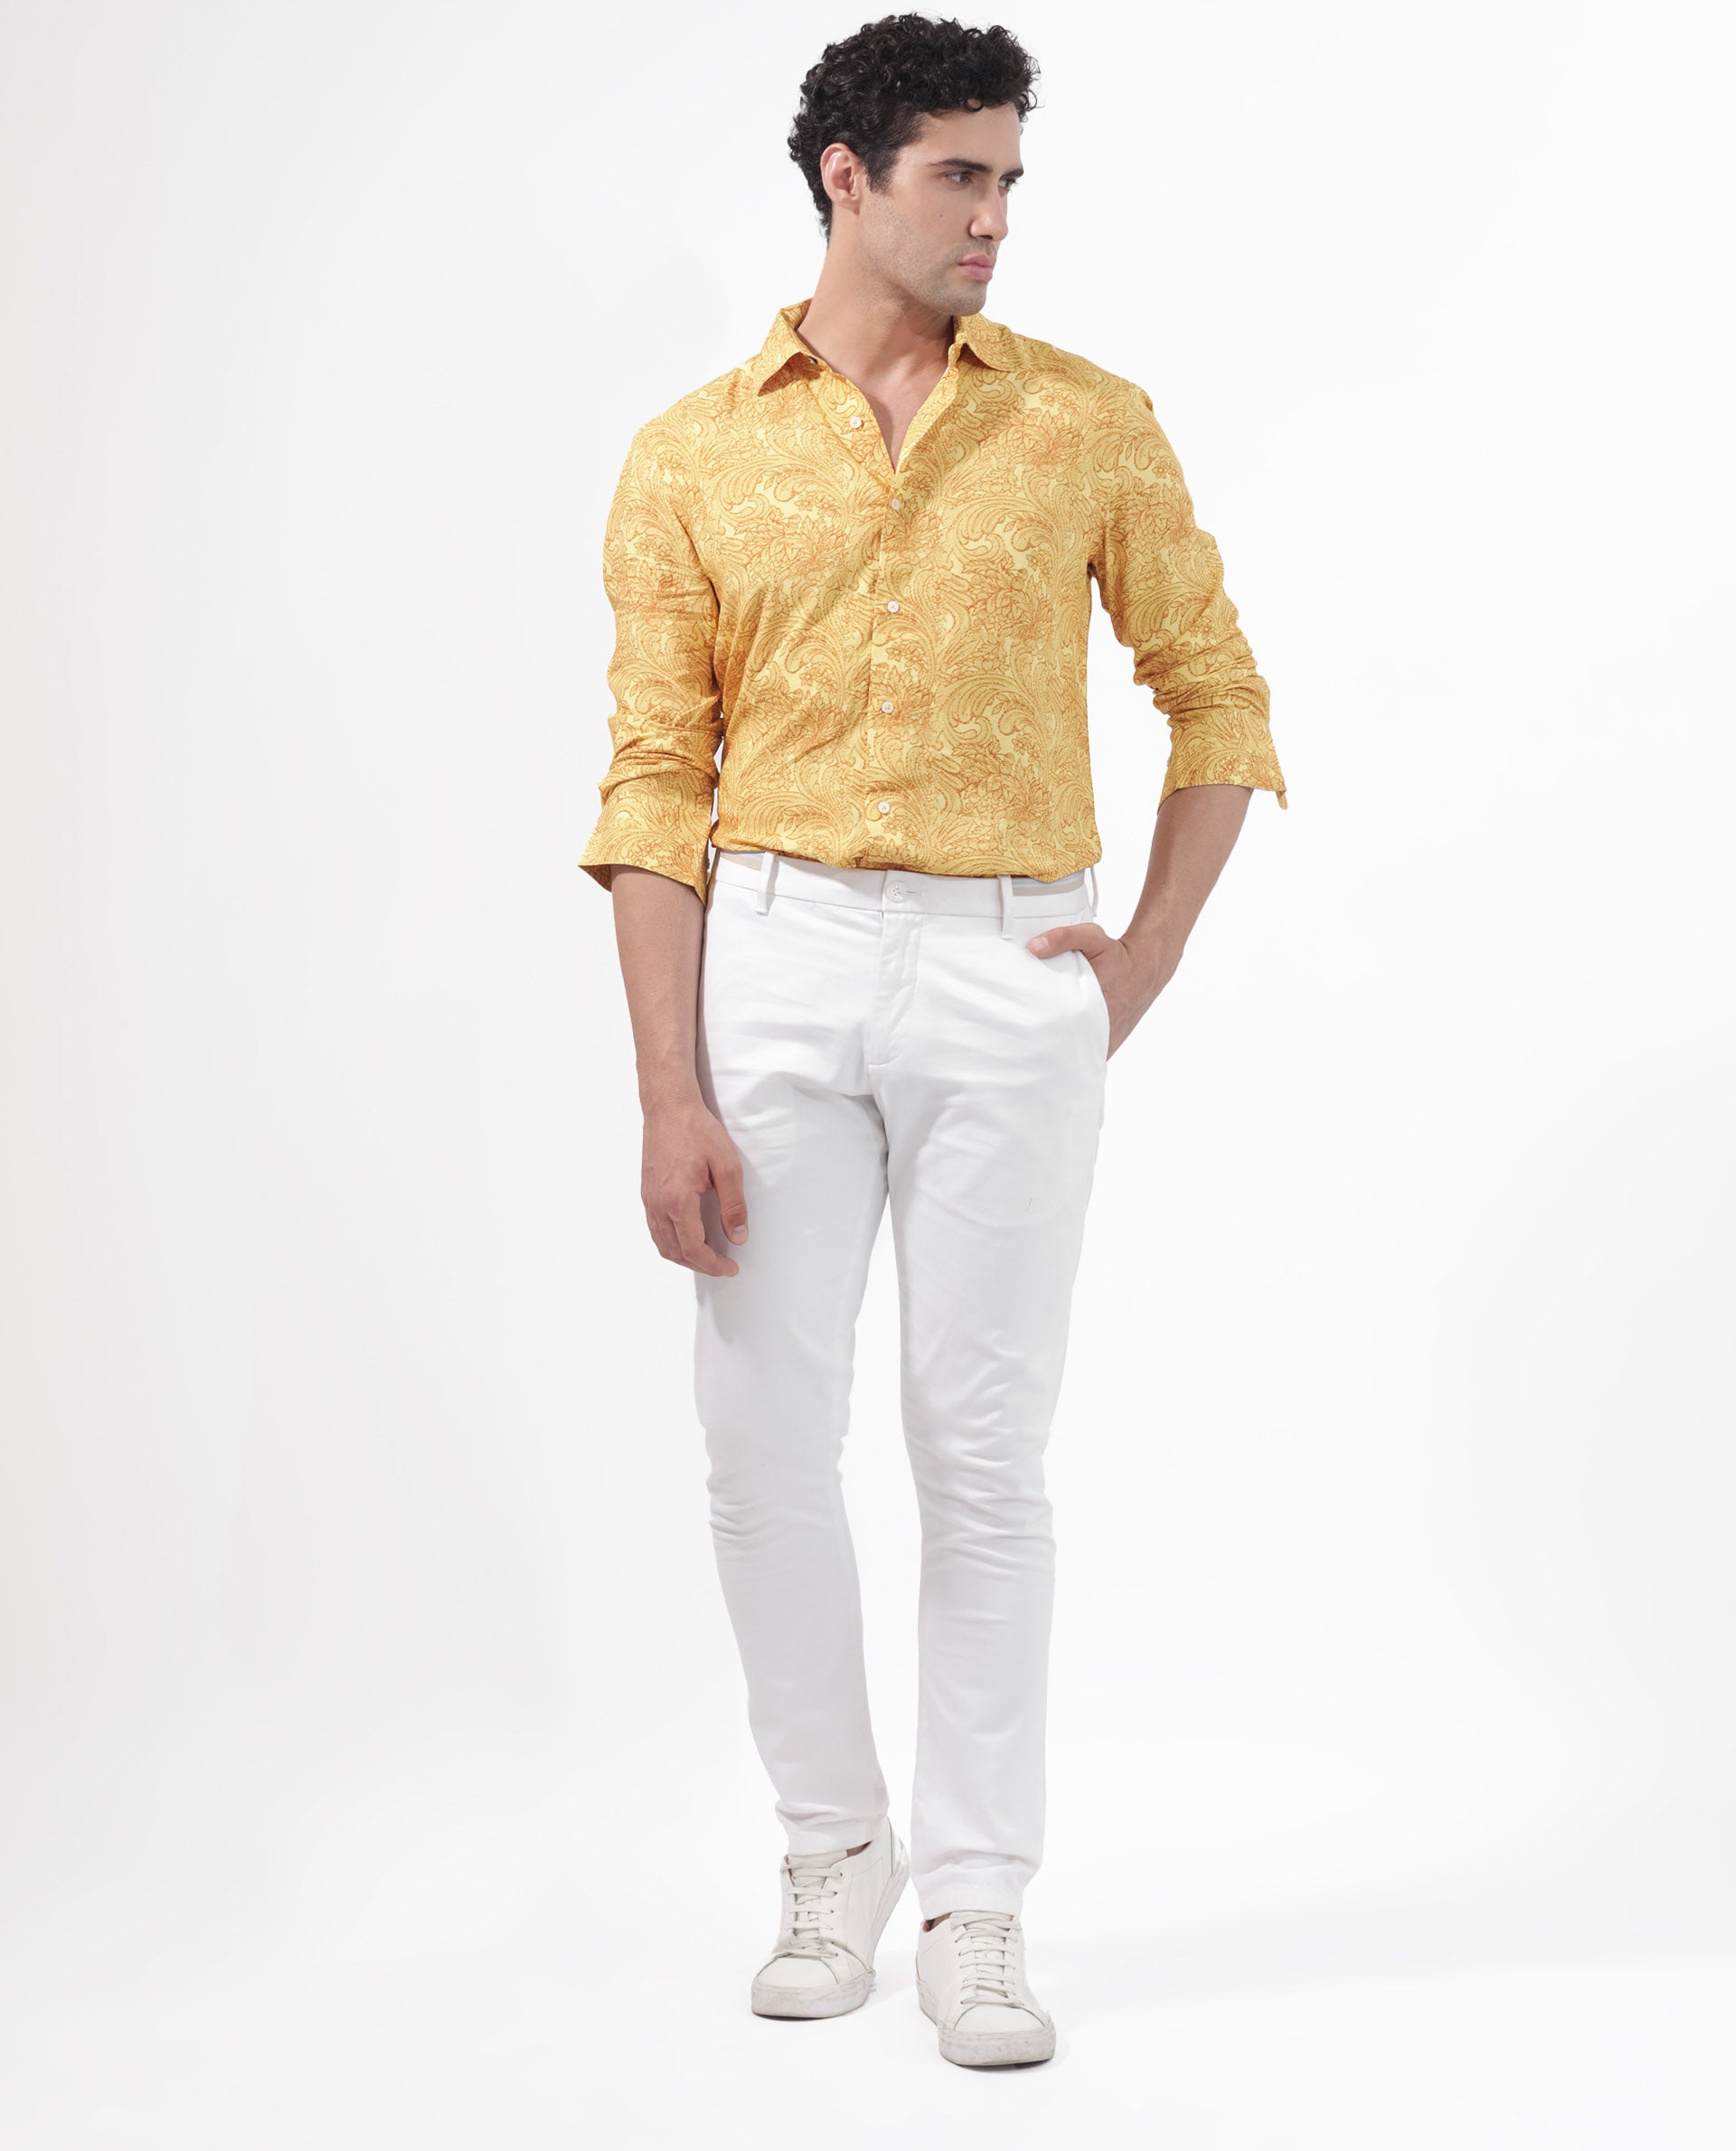 Style Guide: How to dress up and wear white T-shirt? | Fab Fashion Fix |  Yellow outfit, Floral printed pants outfits, Fashion